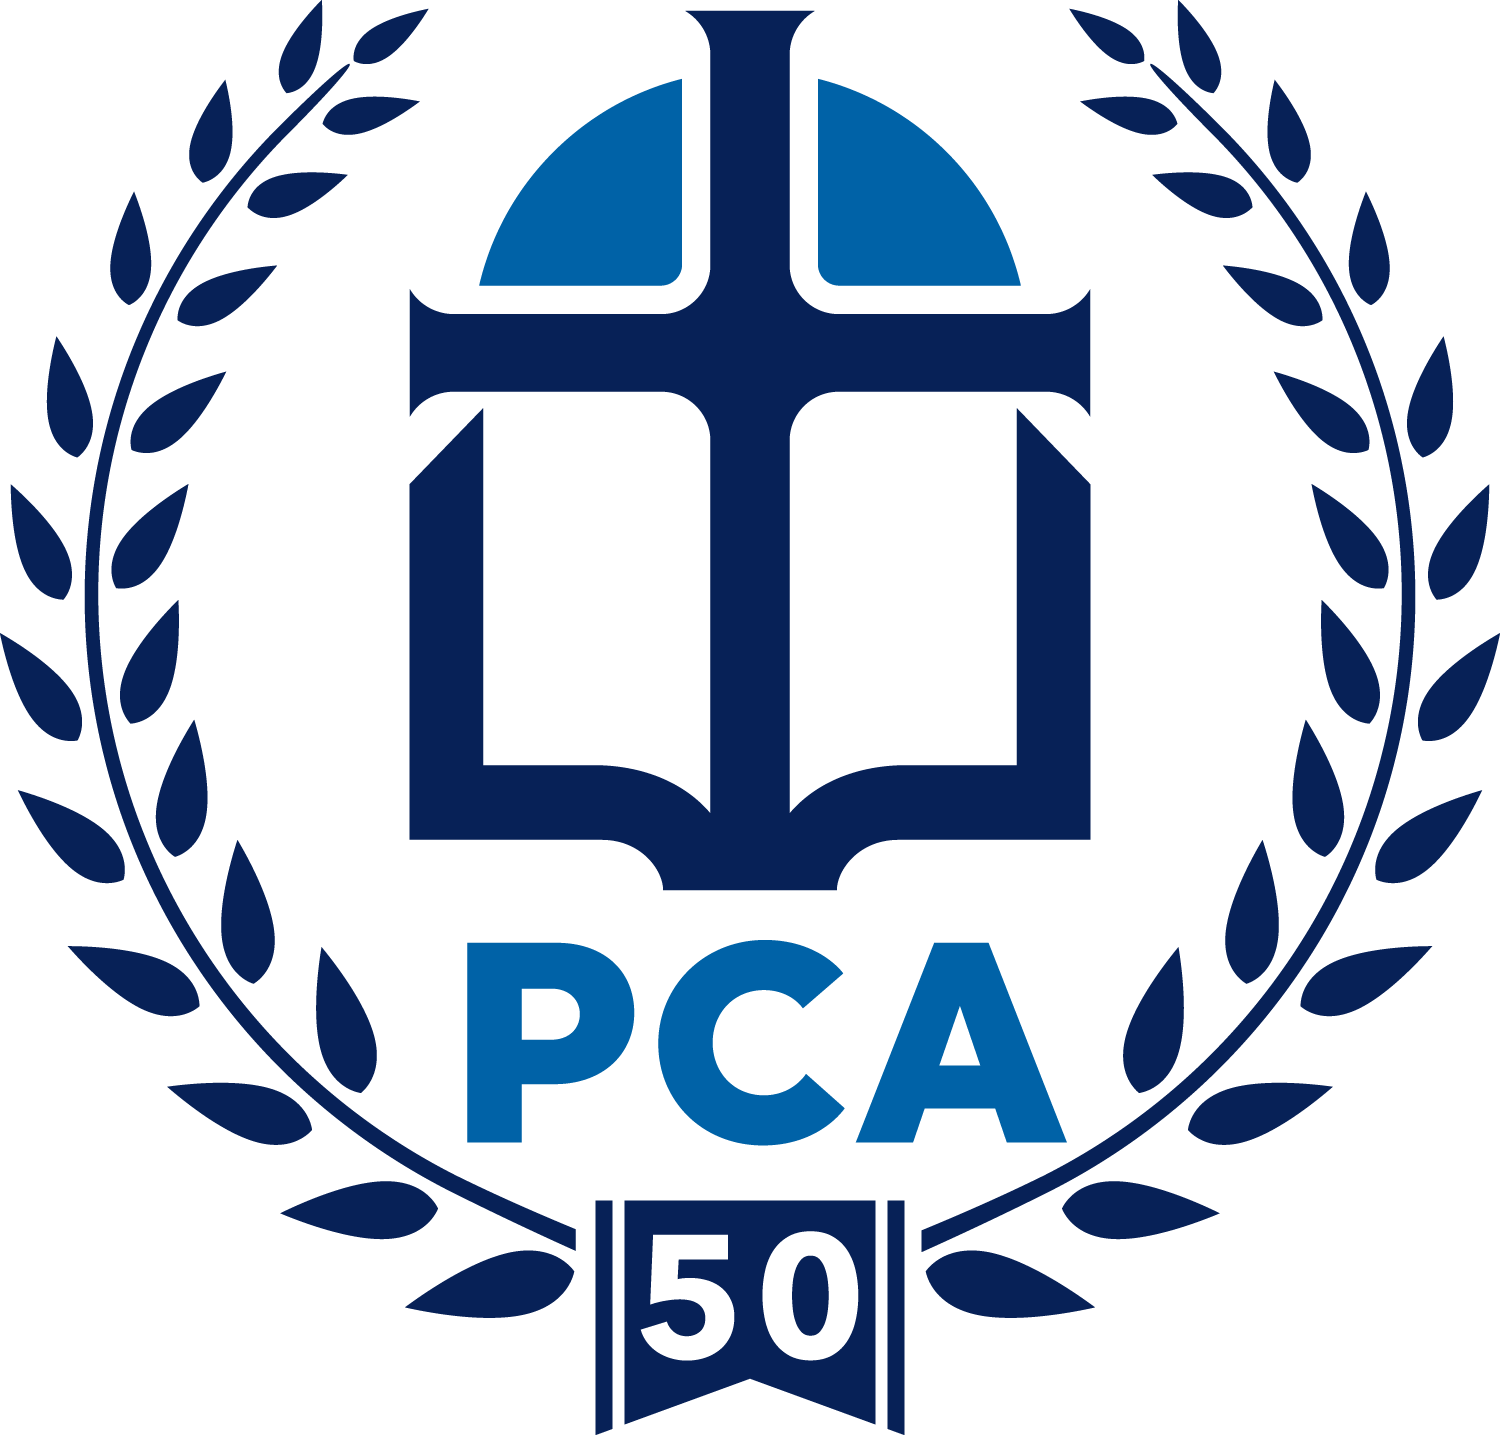 PCA 50th Celebration Concert at Tennessee Performing Arts Center